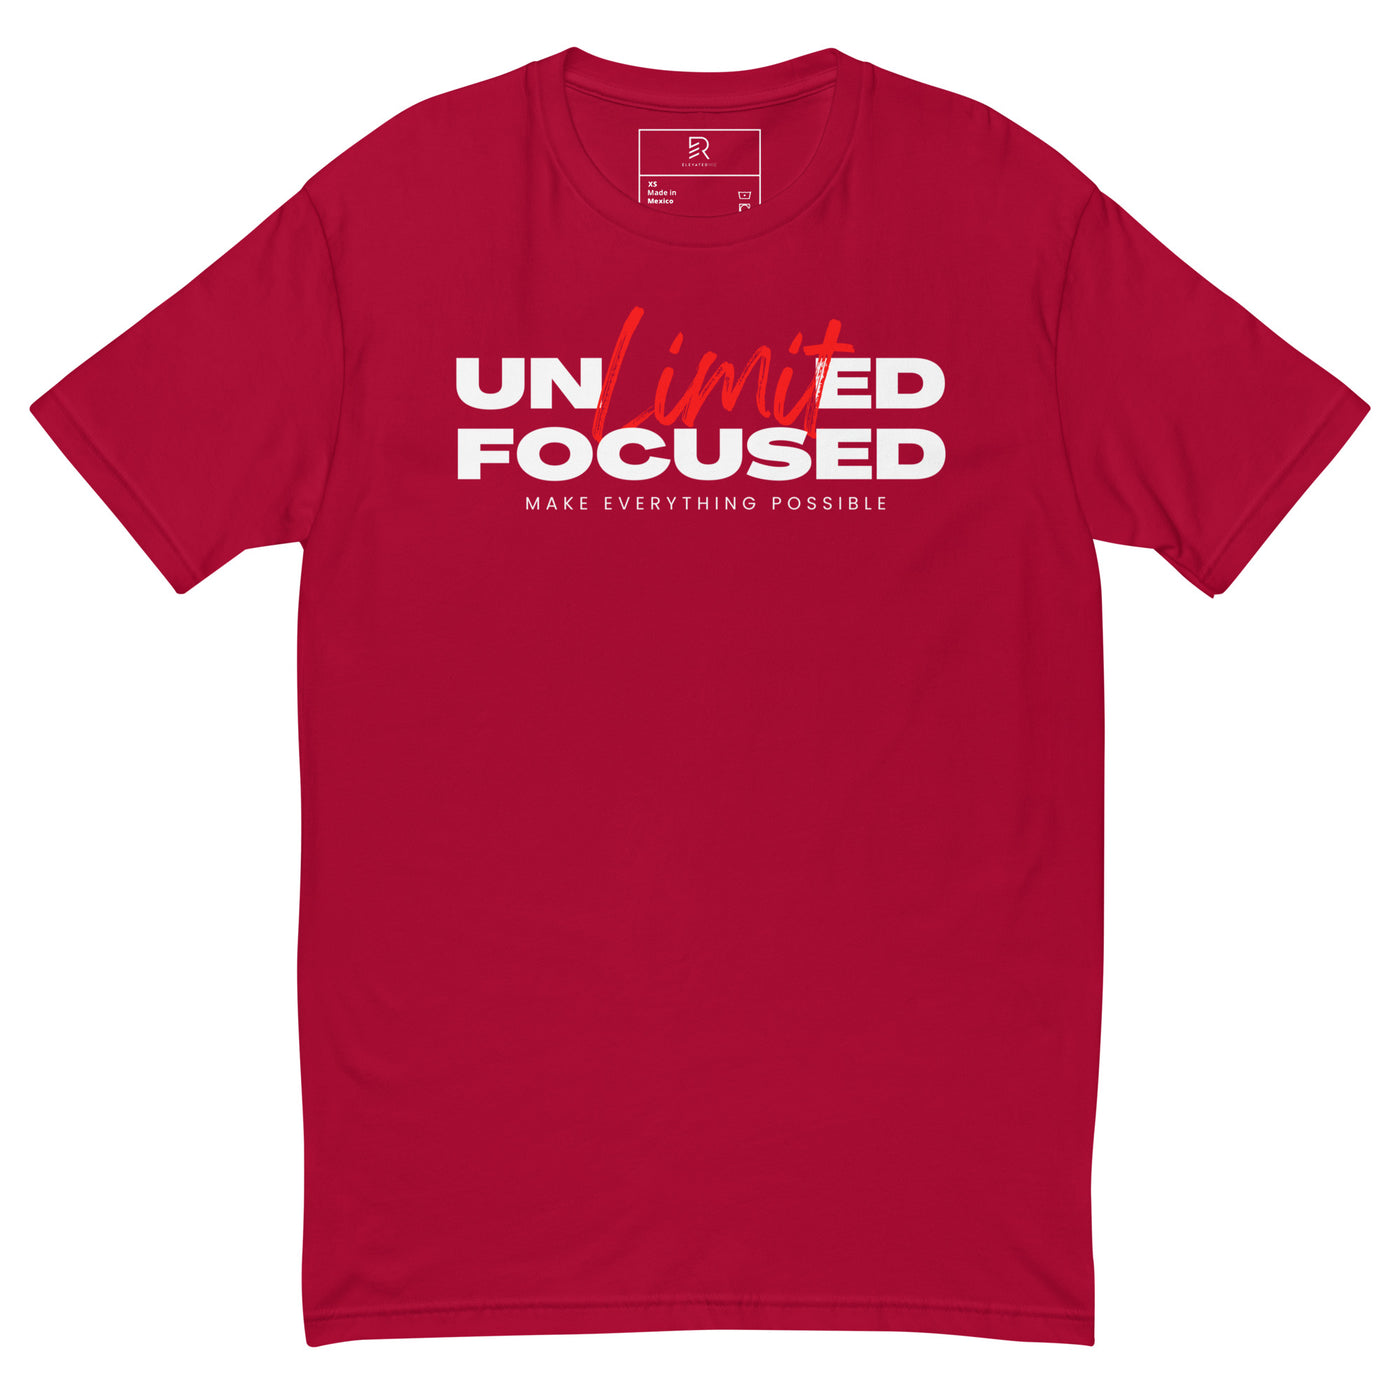 Men's Fitted Red T-shirt - Unlimited Focus